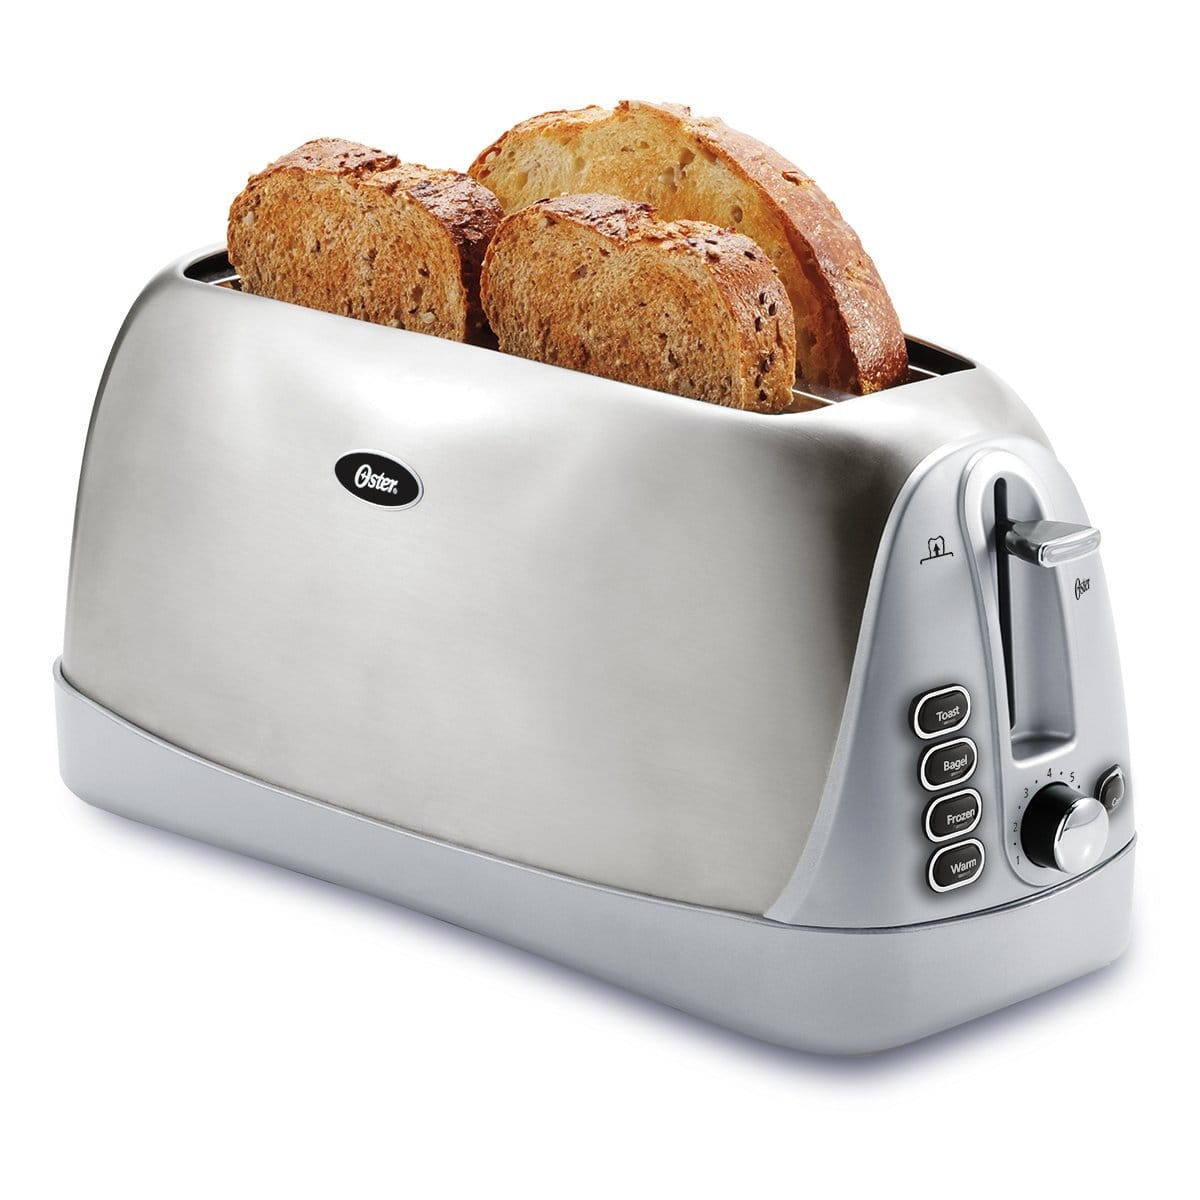 Oster Long Slot Toaster